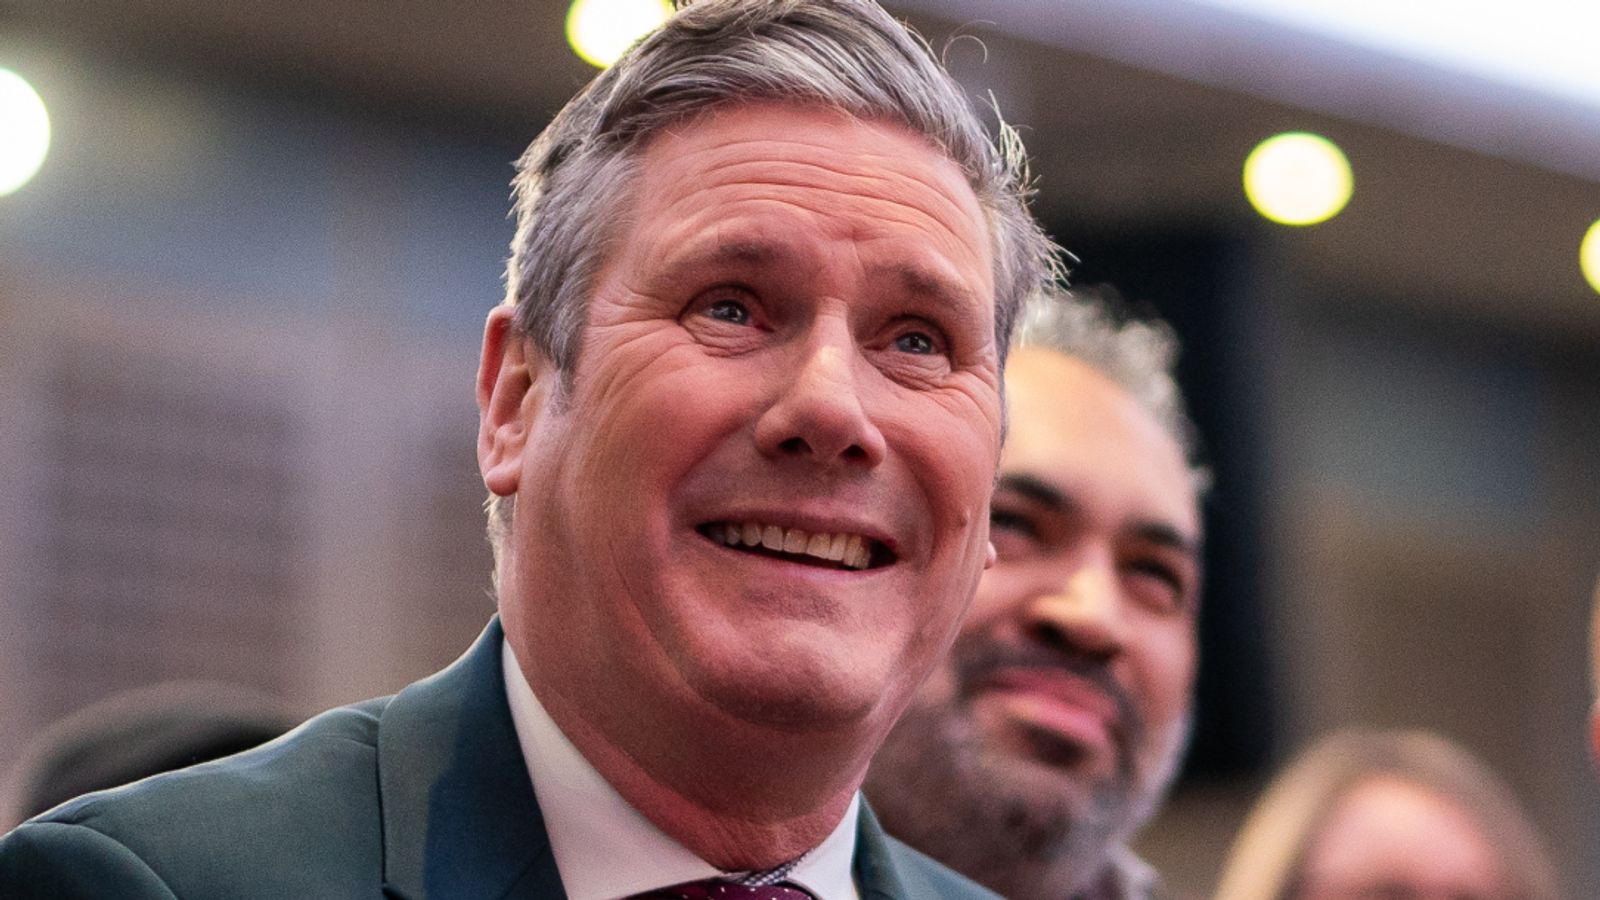 Starmer's 'radical' promises have gone as he targets power - but we still don't really know who he is